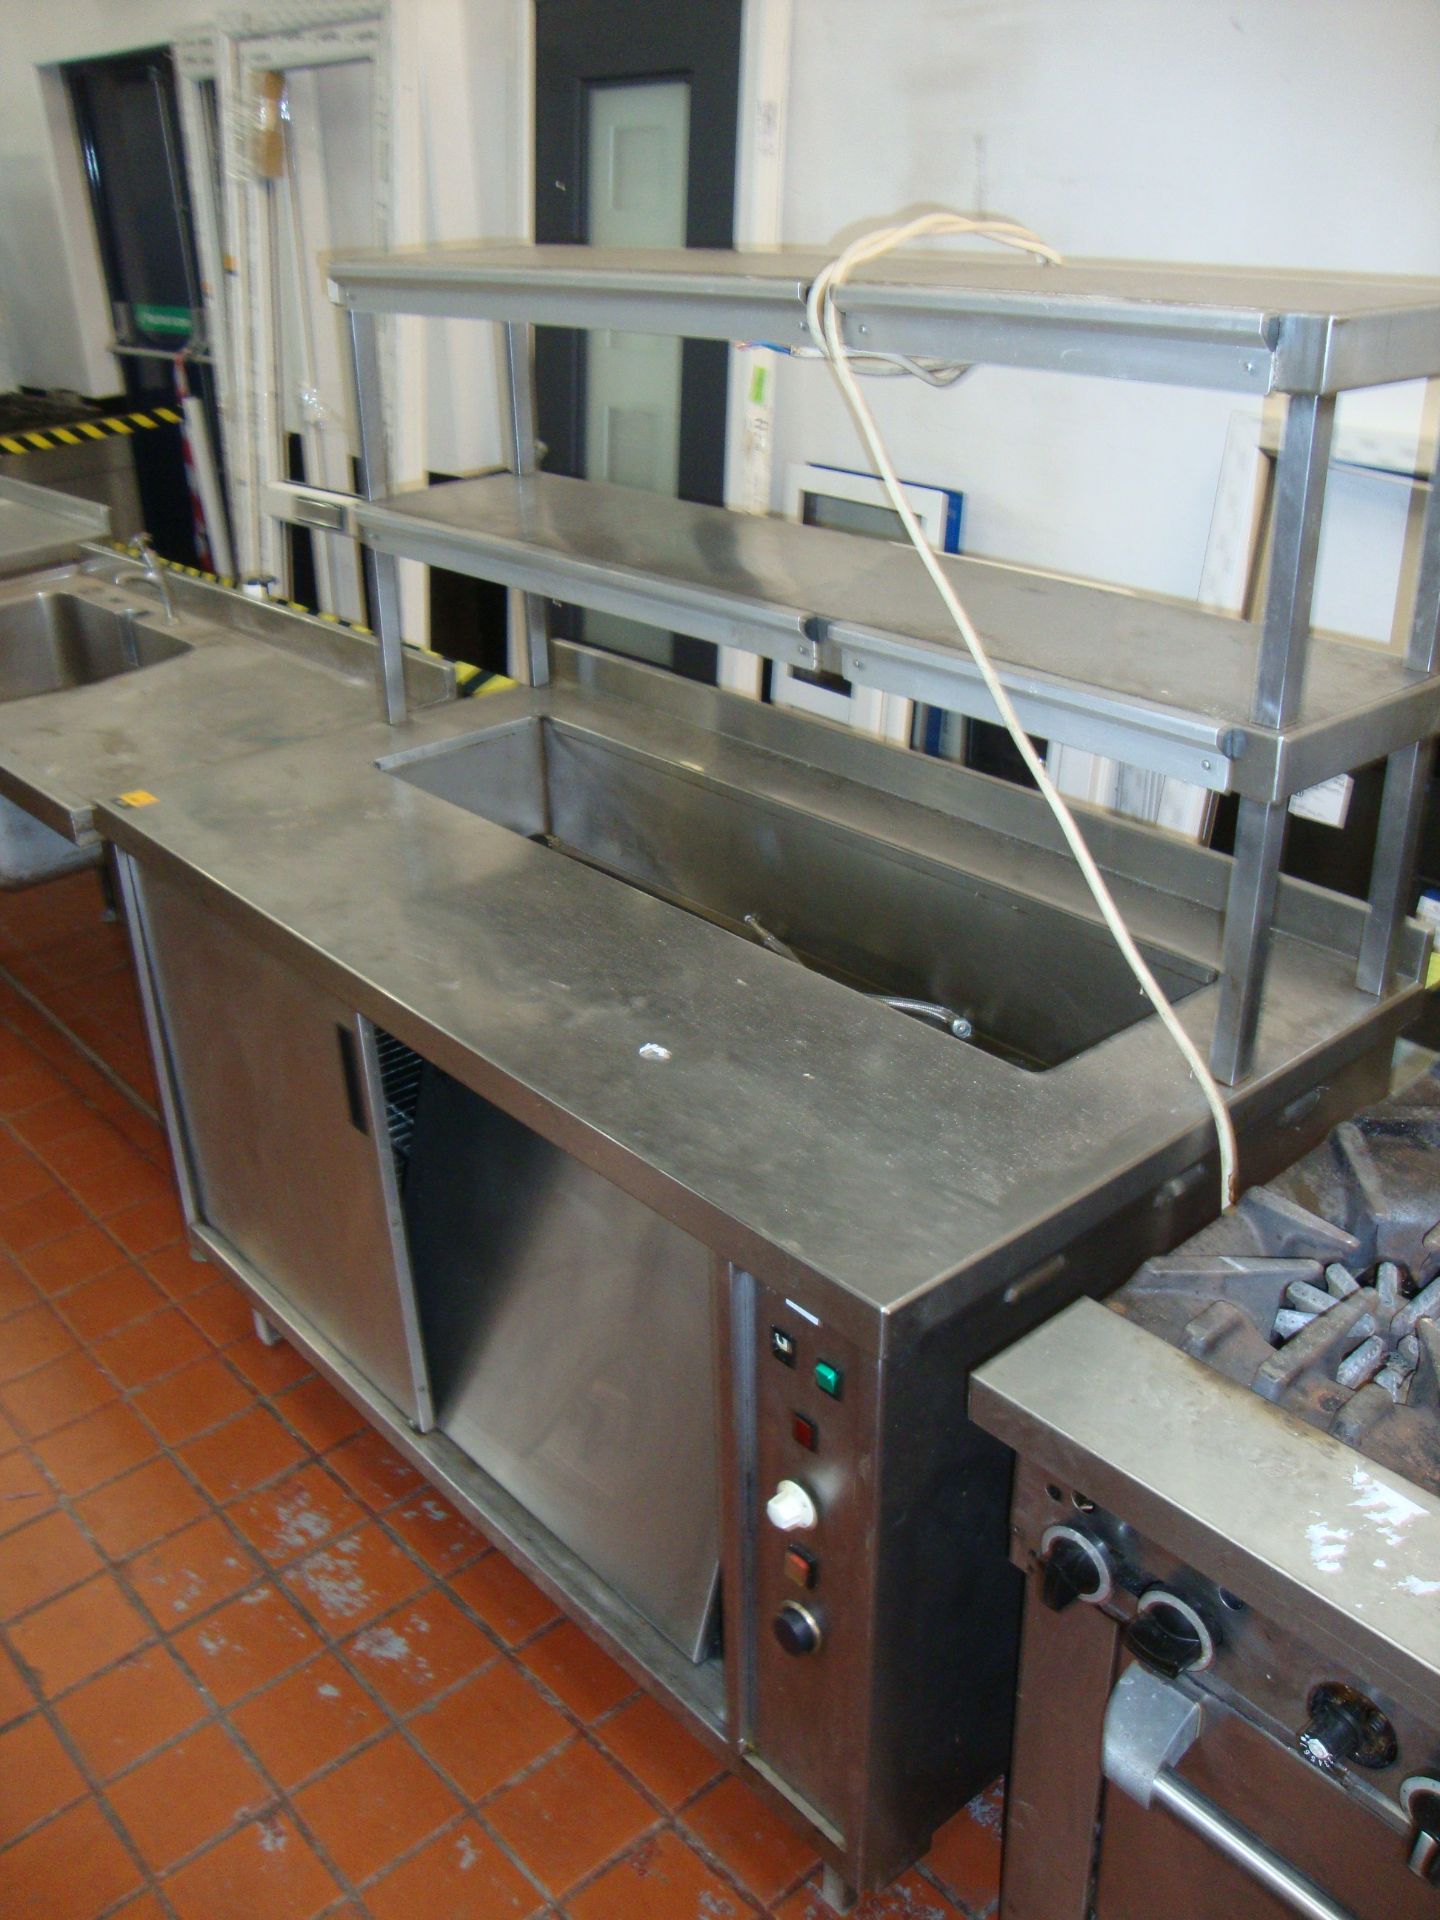 Stainless steel warming cupboard with bain marie section & illuminated serving shelves above, 59" - Image 3 of 4